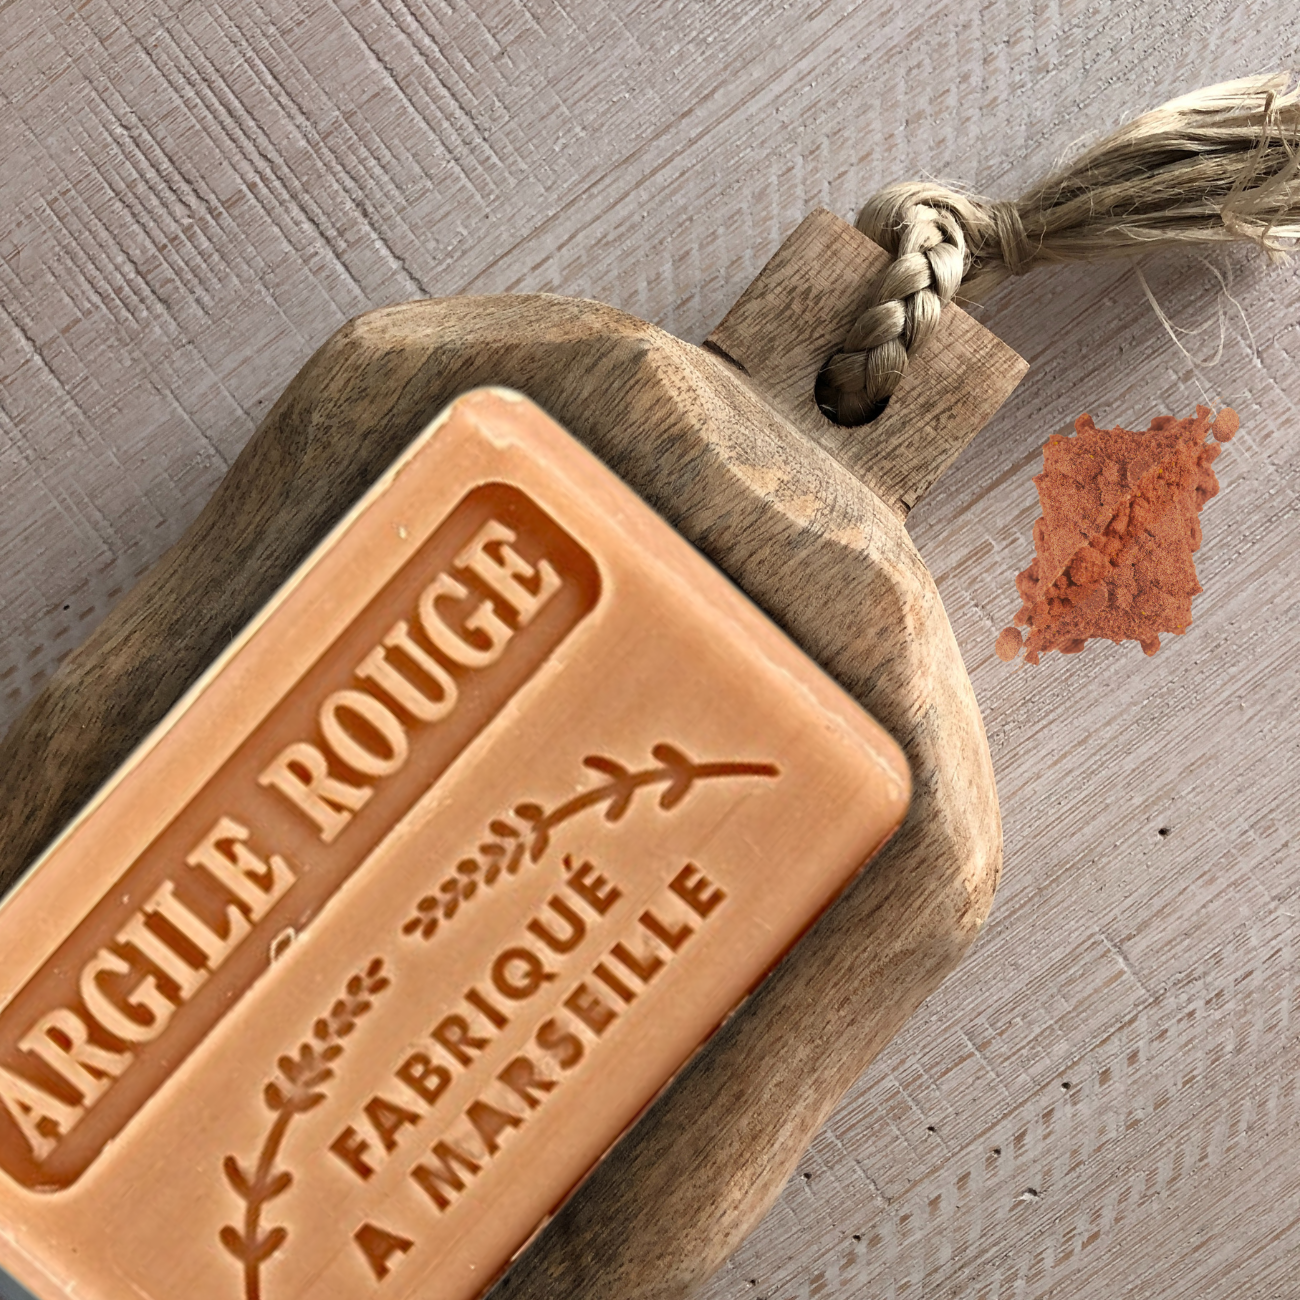 French Marseille Soap Argile Rouge (Red Clay) 125g